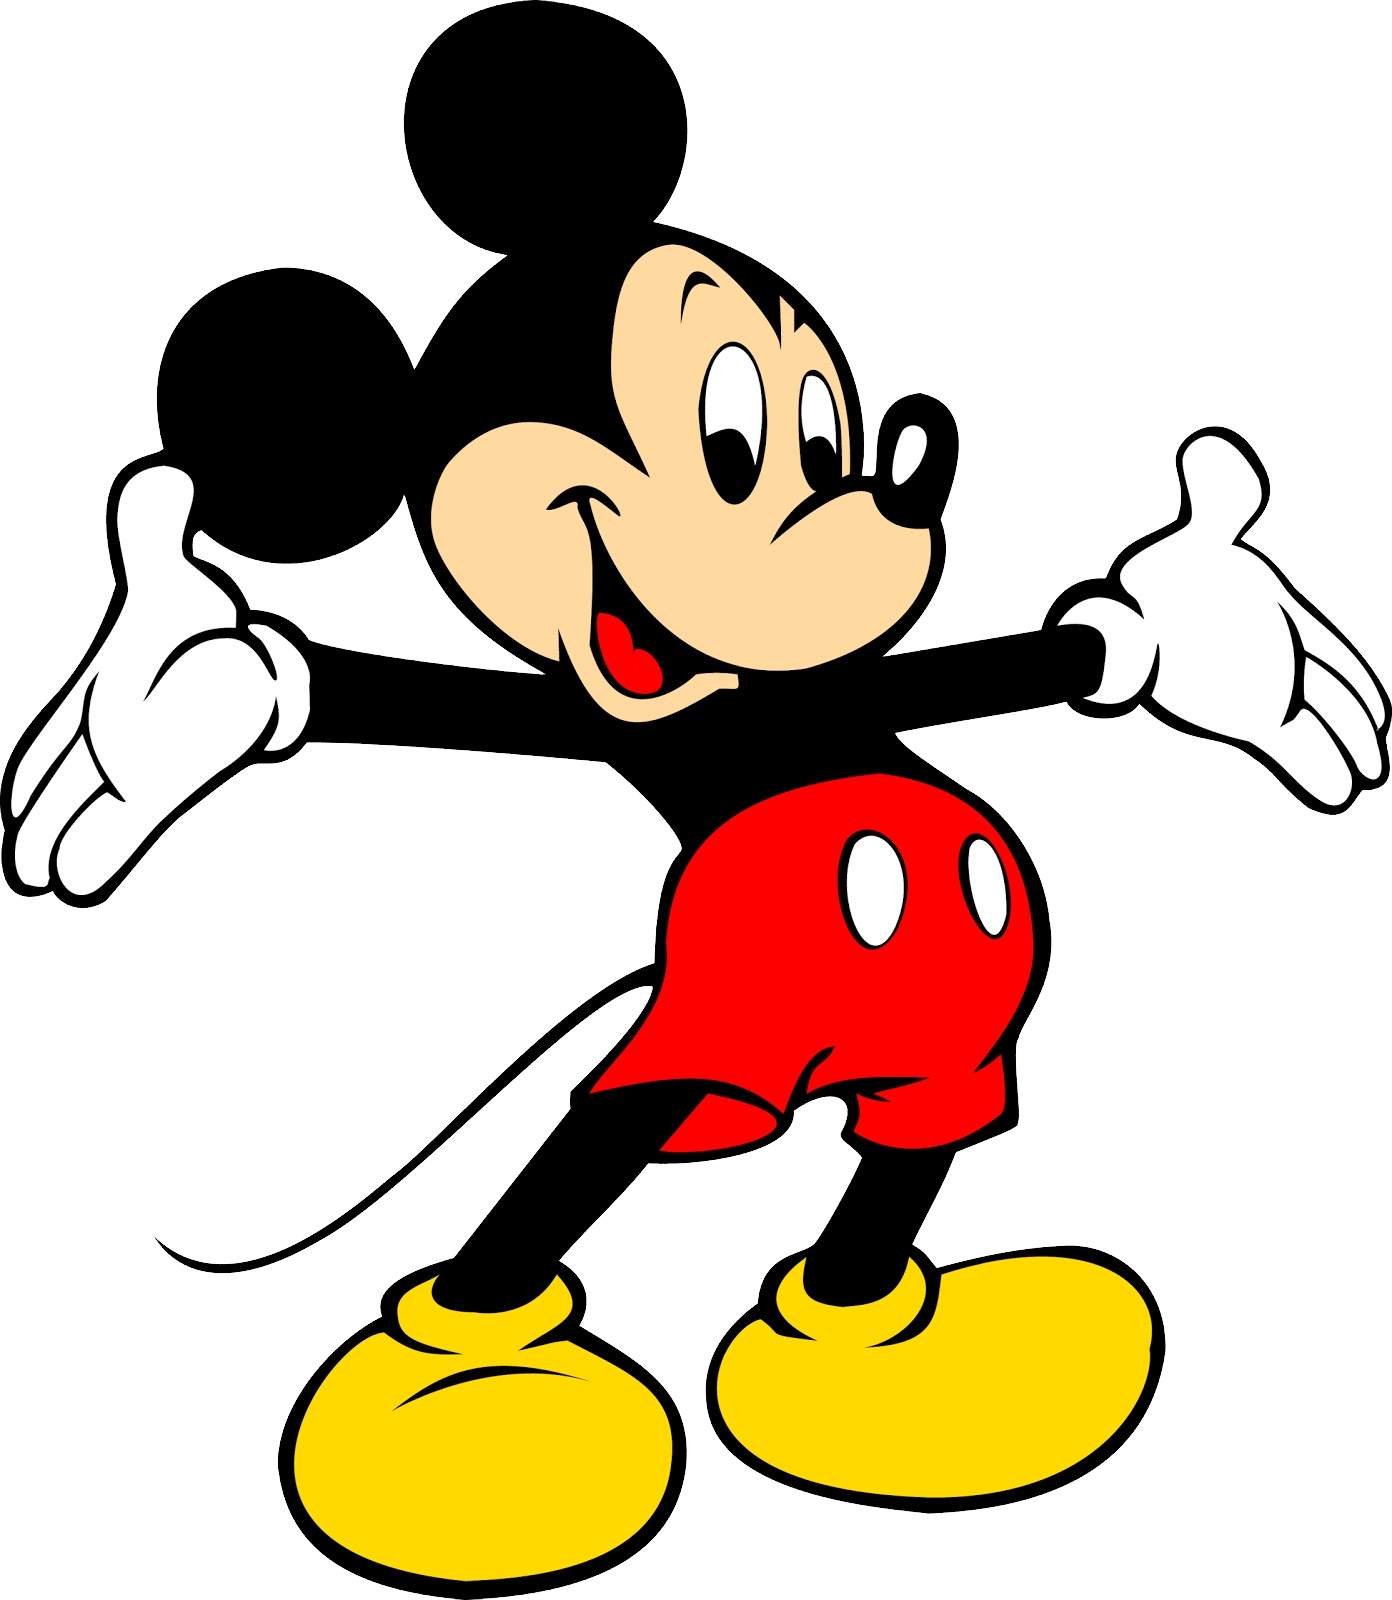 Mickey Png Mickey Mouse Png Image Purepng Free Transparent Cc0 When Designing A New Logo You Can Be Inspired By The Visual Logos Found Here Kumpulan